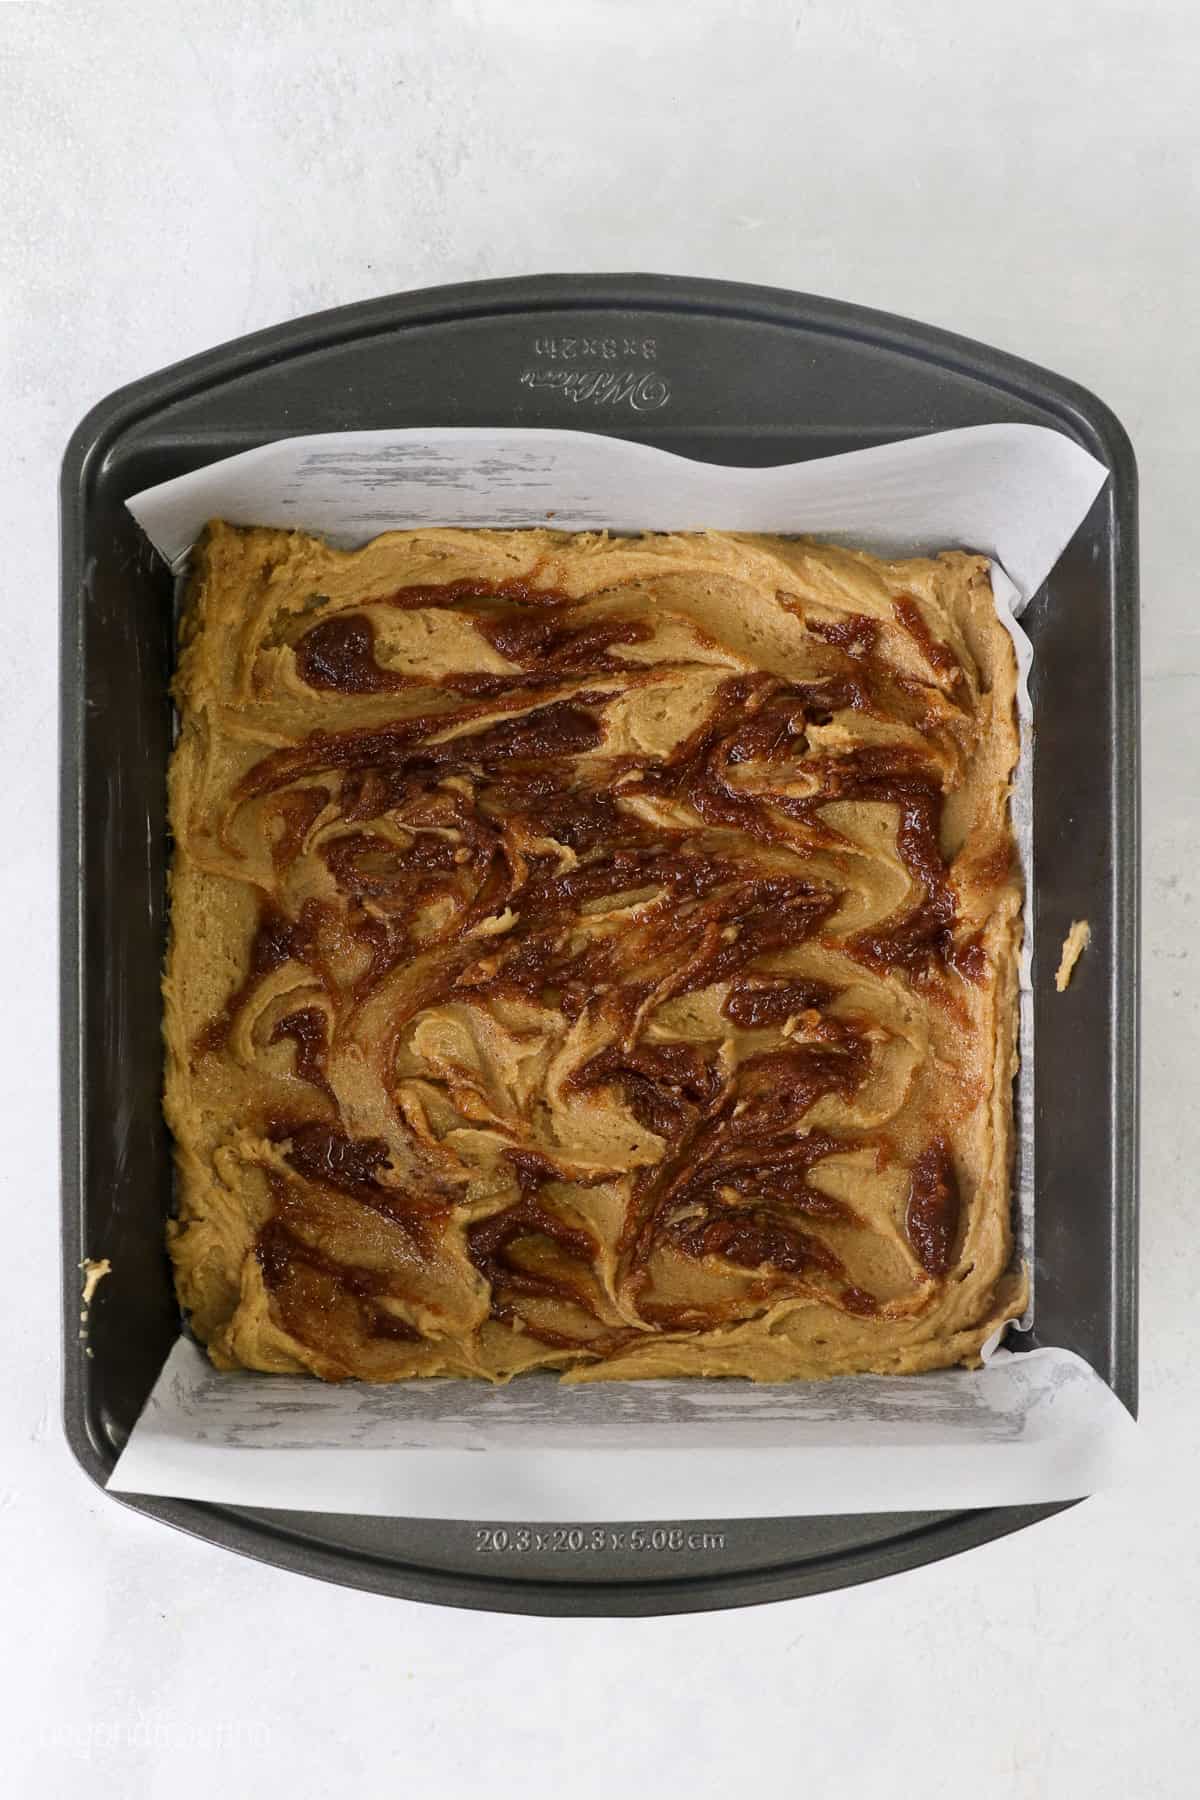 Blondie batter swirled with cinnamon sugar in a lined baking pan.